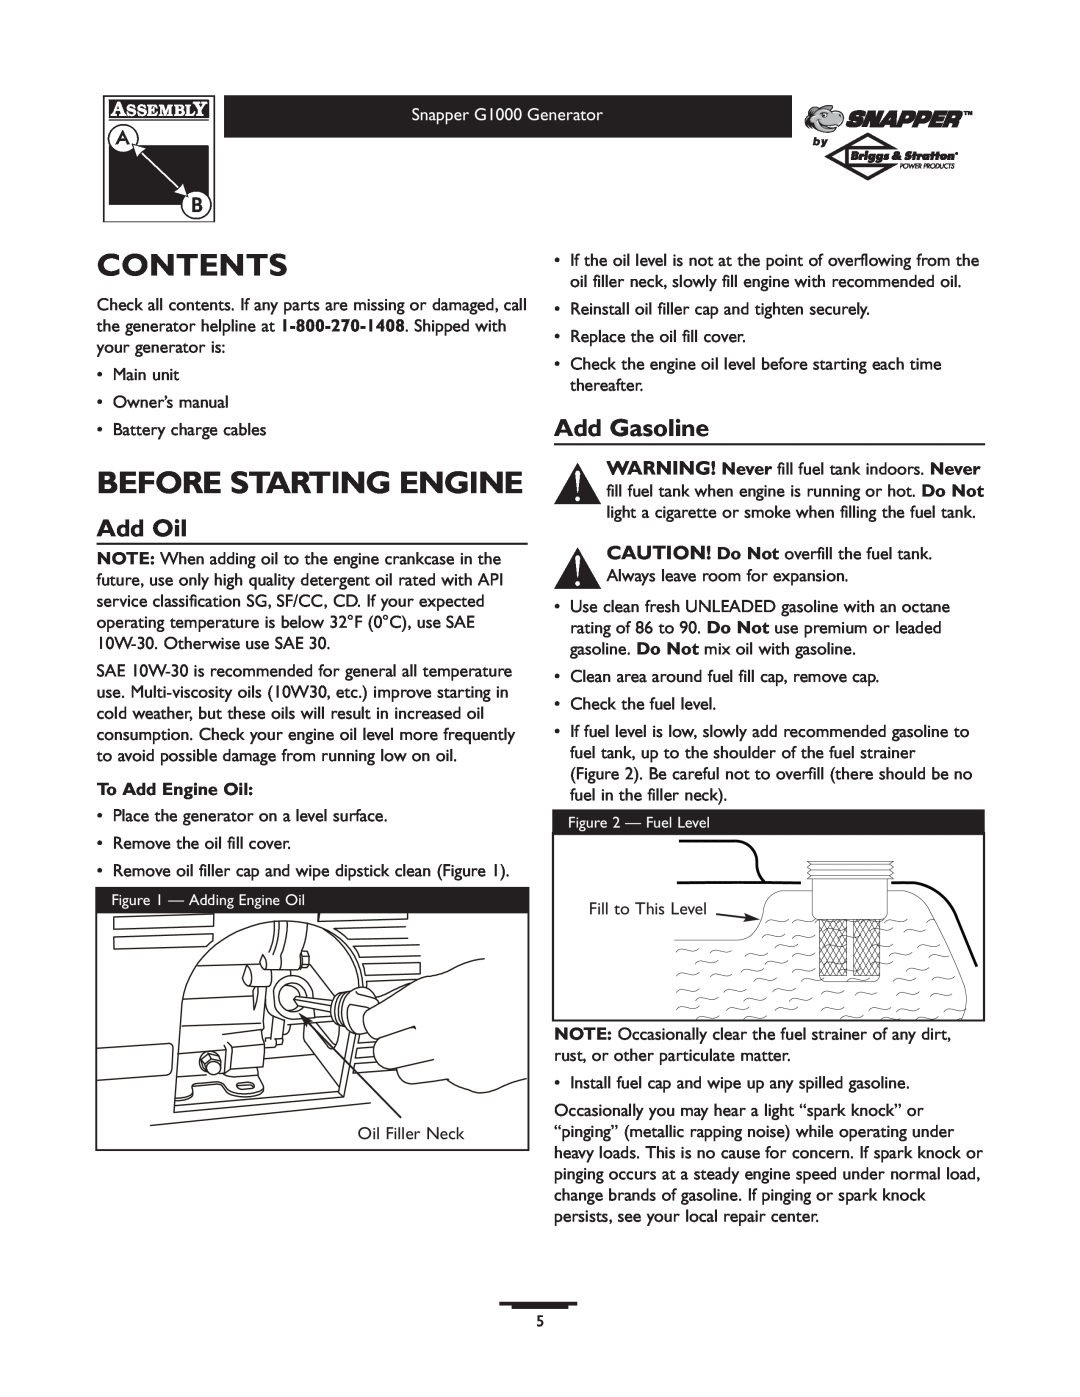 Snapper 1666-0 owner manual Contents, Before Starting Engine, Add Oil, Add Gasoline 